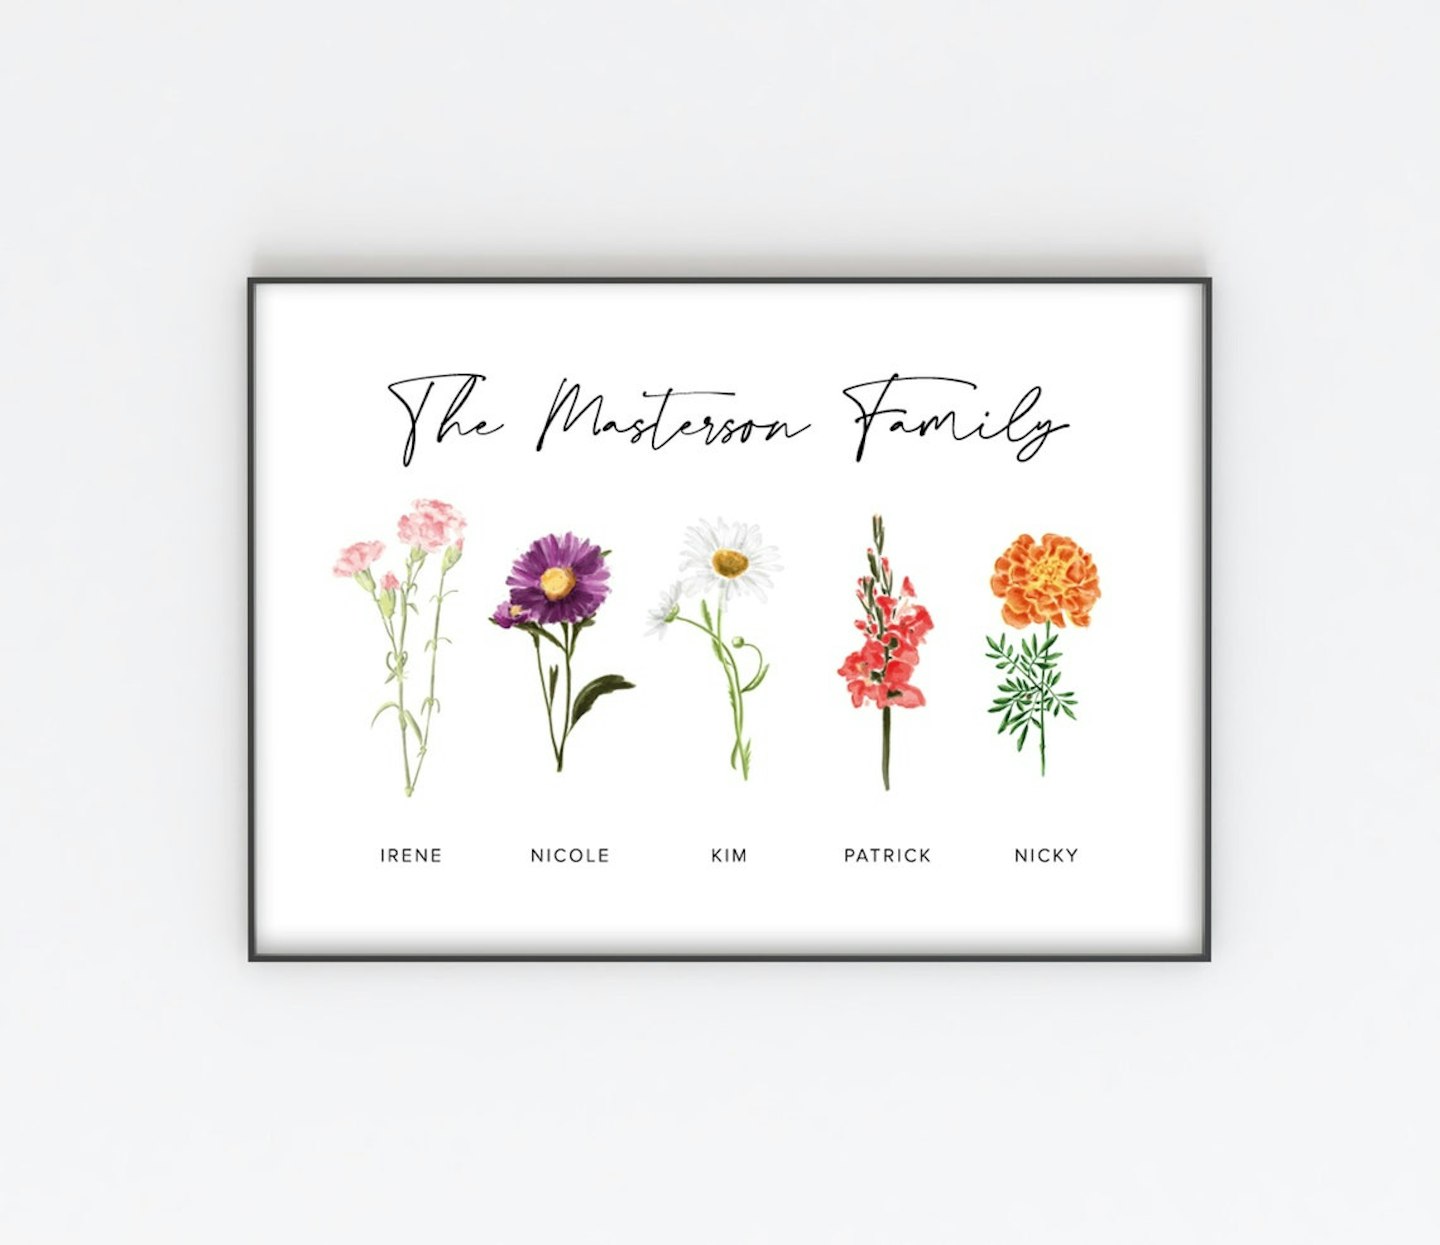 Etsy, Personalised Family Print, From £9.09